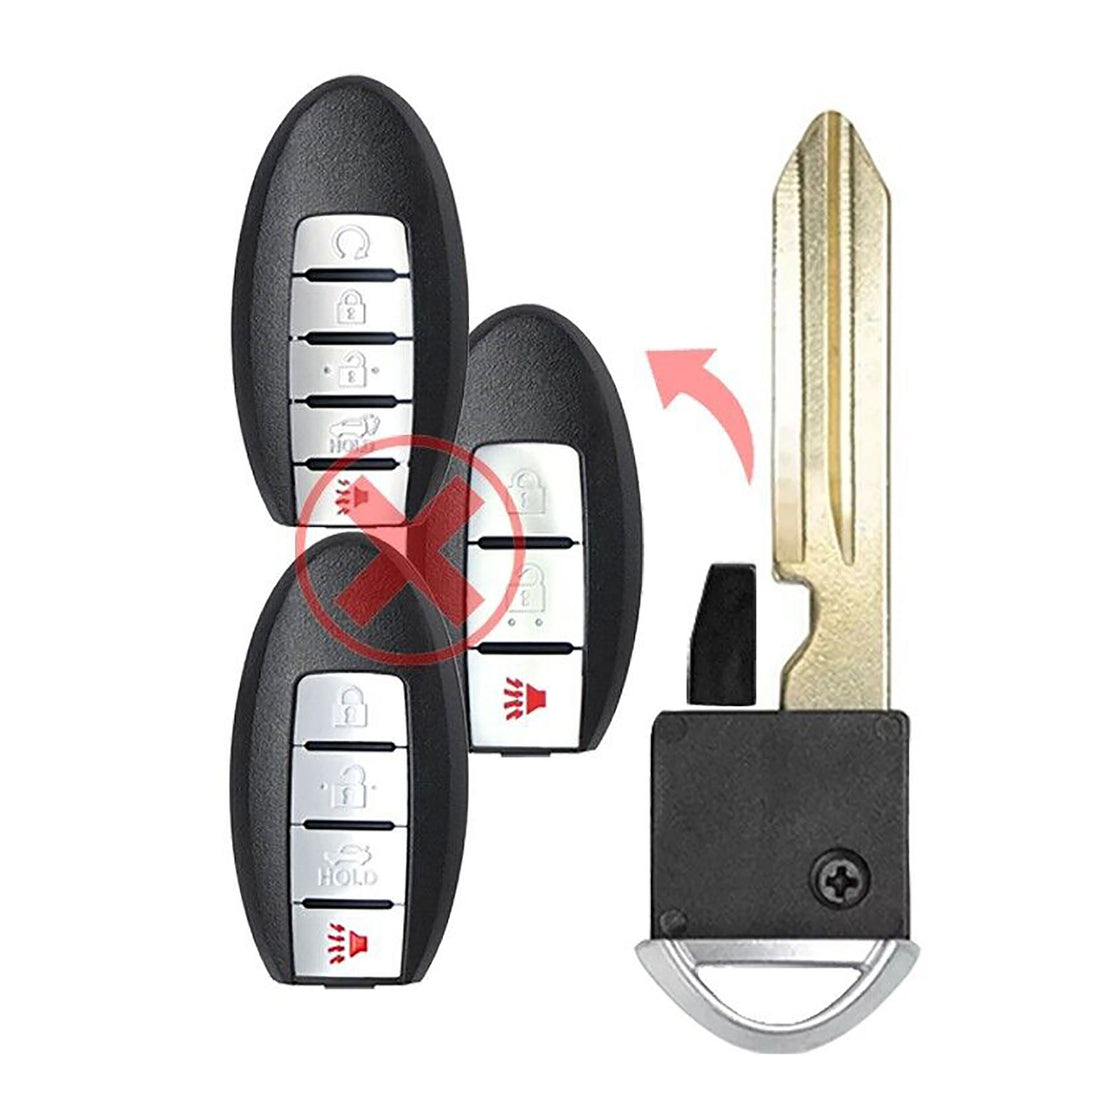 1x New Replacement Key Fob Uncut Insert Blade Compatible with & Fit For Nissan Infiniti - MPN CWTW-SHELL-07